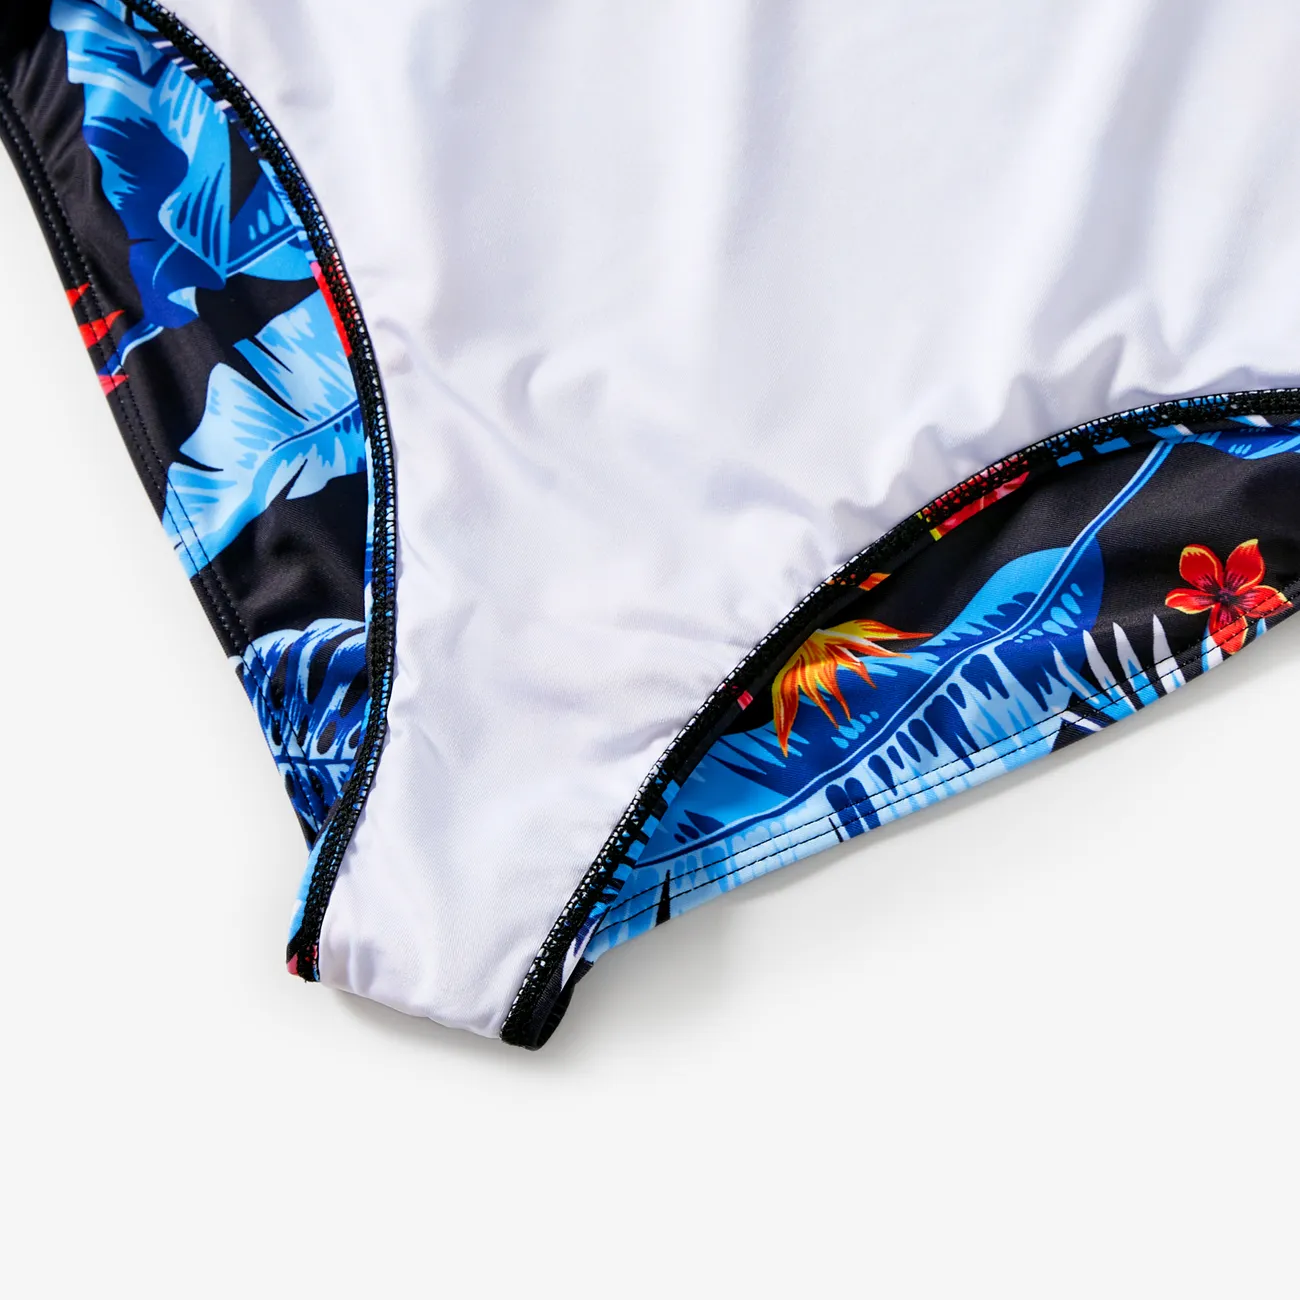 Family Matching Floral Drawstring Swim Trunks or Mesh Cross Strap One-Piece Swimsuit Blue big image 1